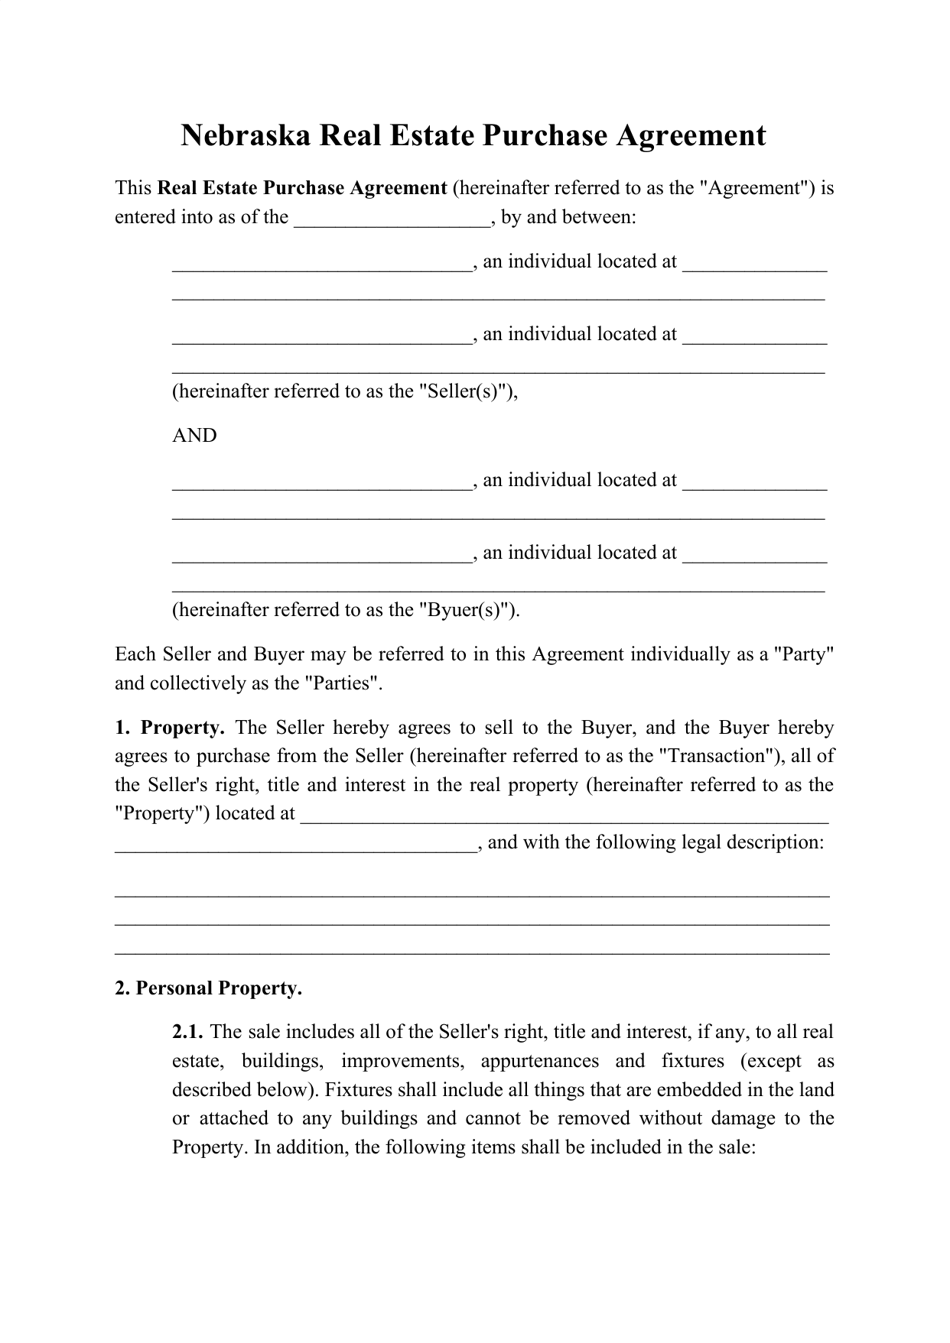 nebraska-real-estate-purchase-agreement-template-fill-out-sign